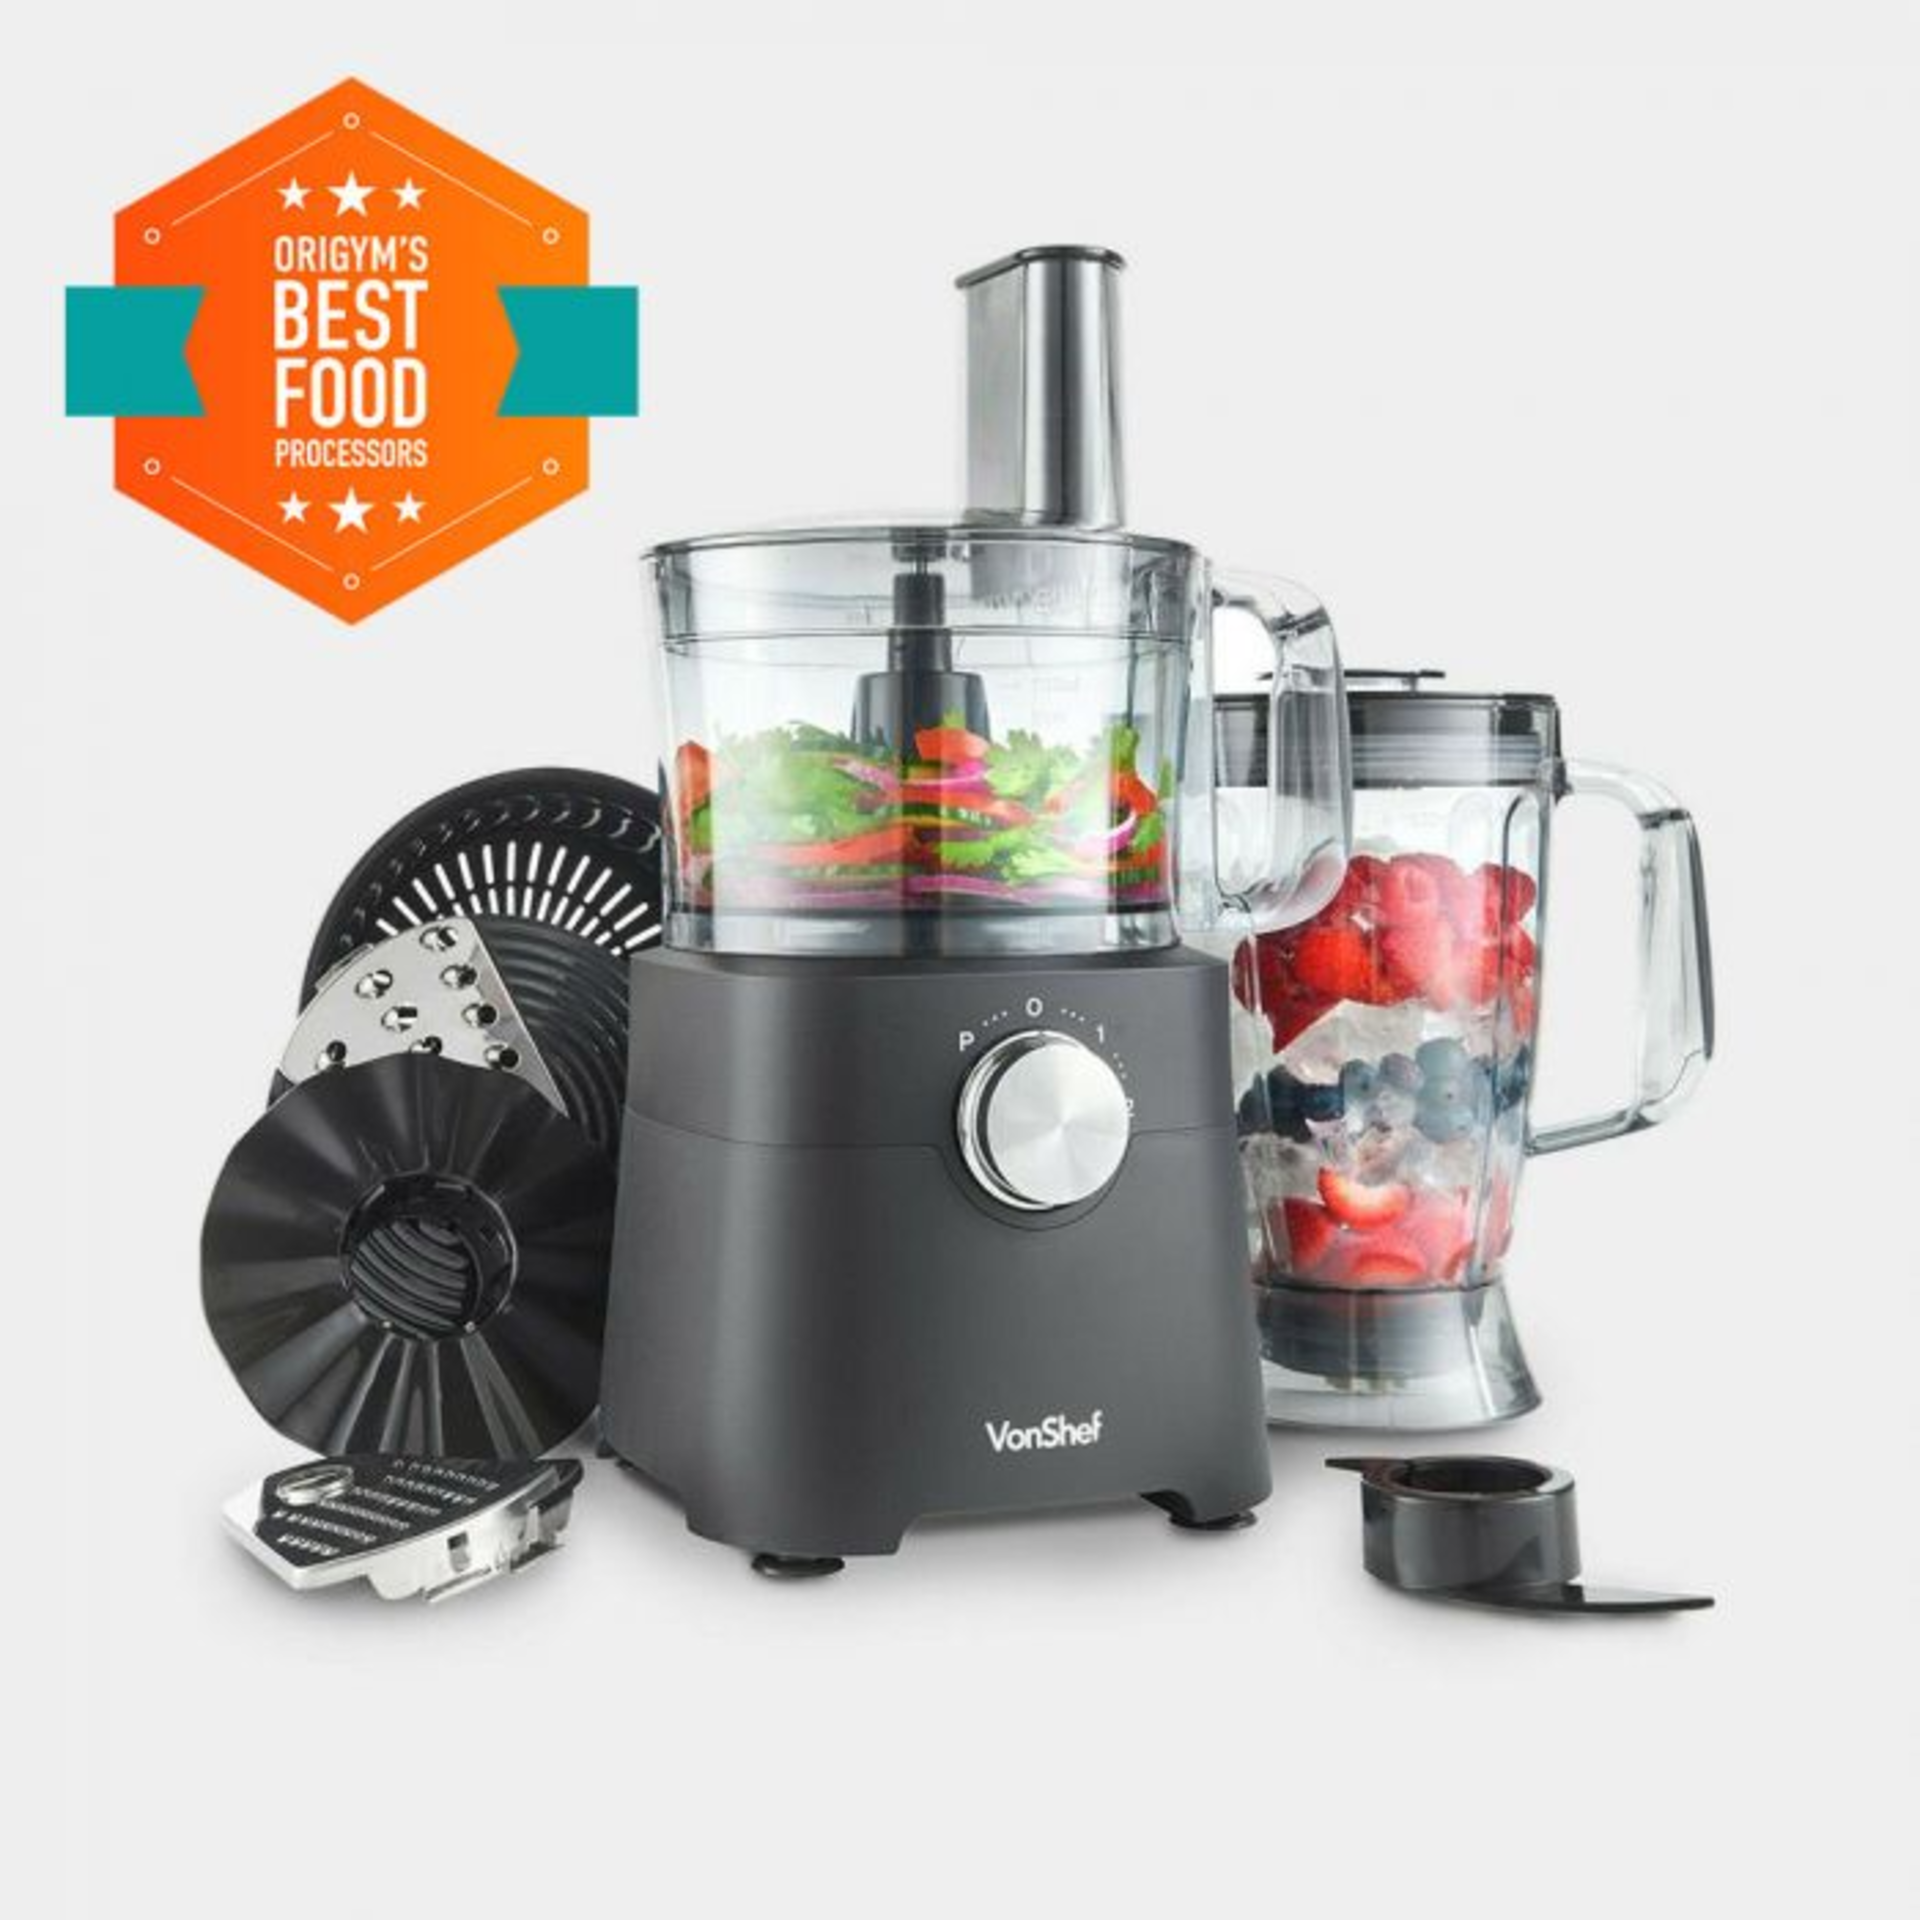 750W Food Processor. The generous 1.8L blending jar is ideal for making large quantities of soups